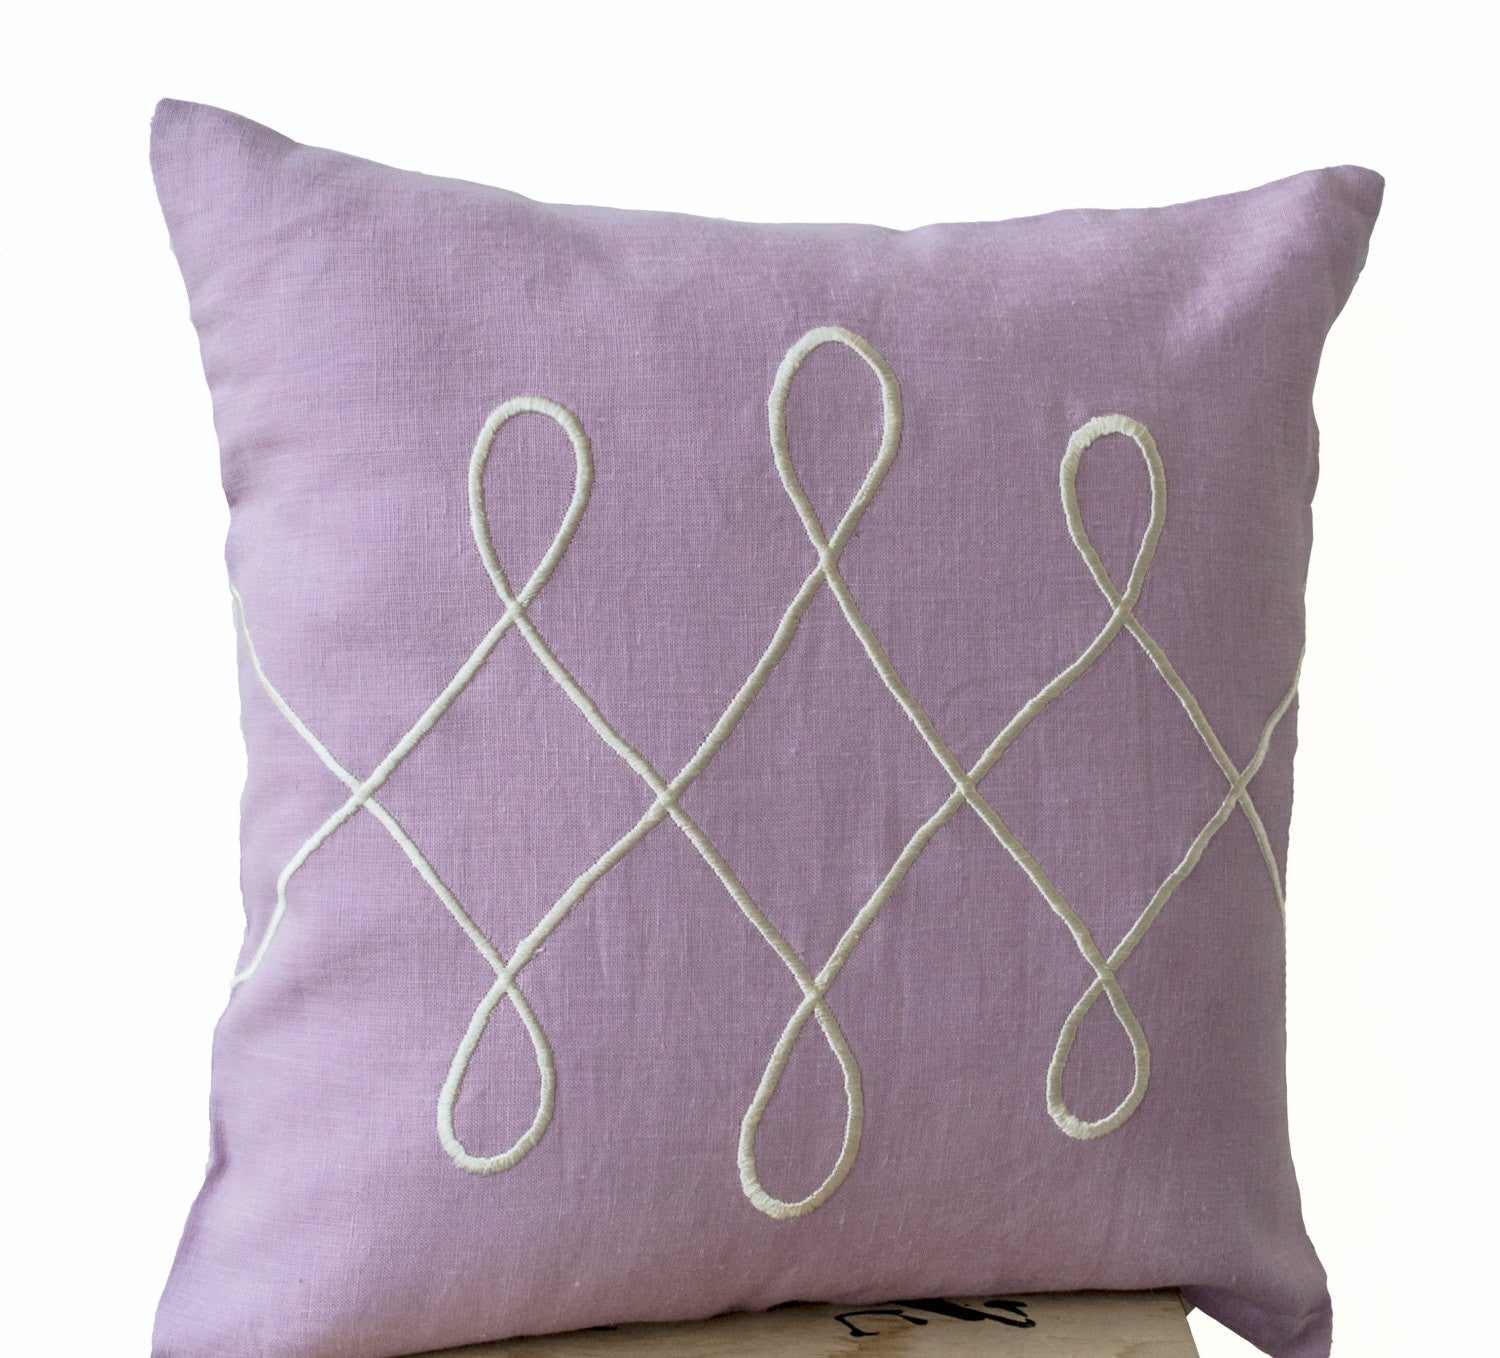 Handmade linen purple pillow with white embroidery